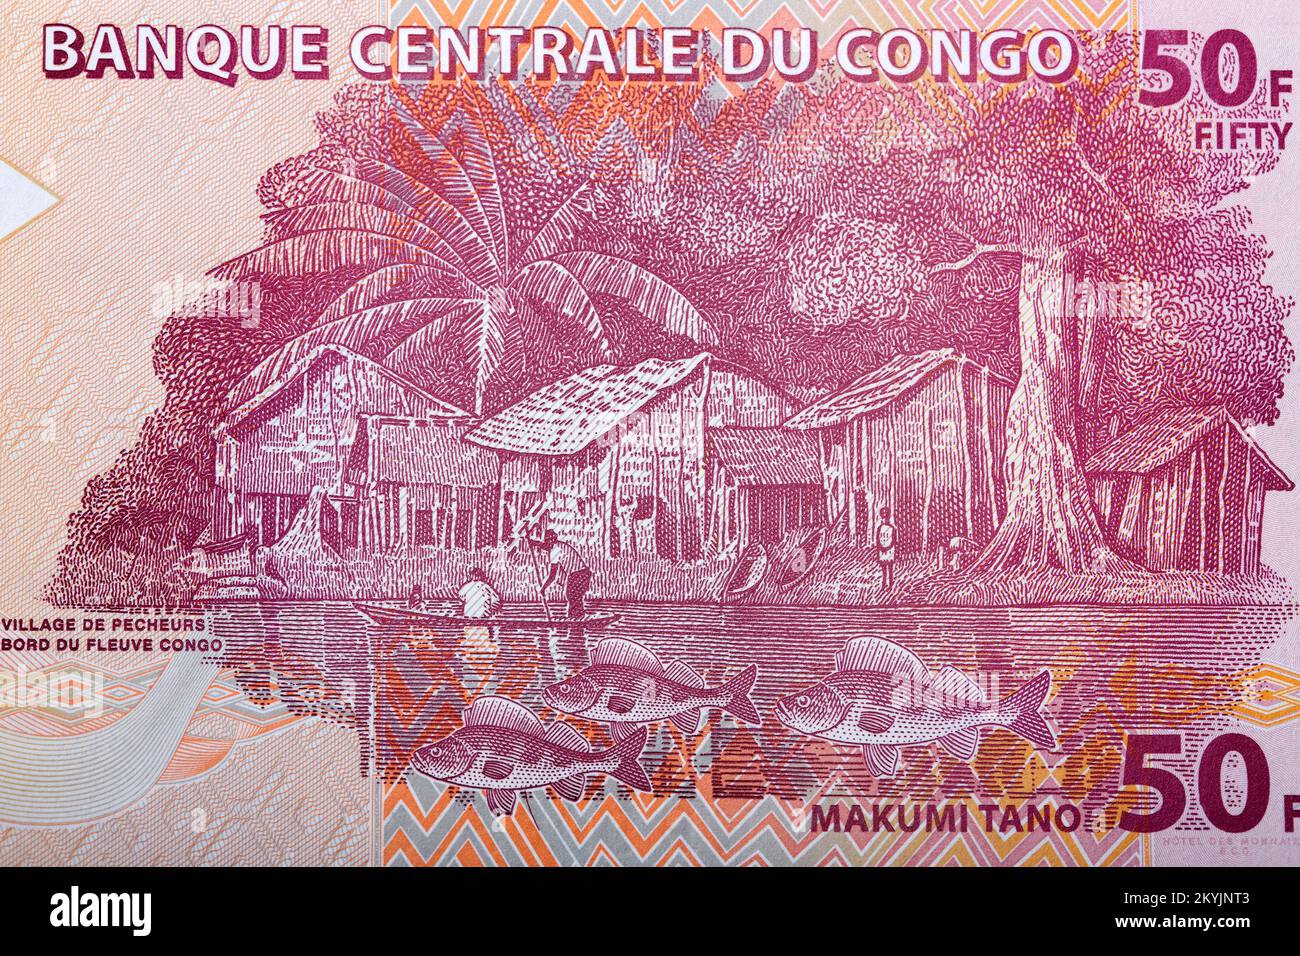 Fishermen's village along the Congo River from Congolese money - franc Stock Photo